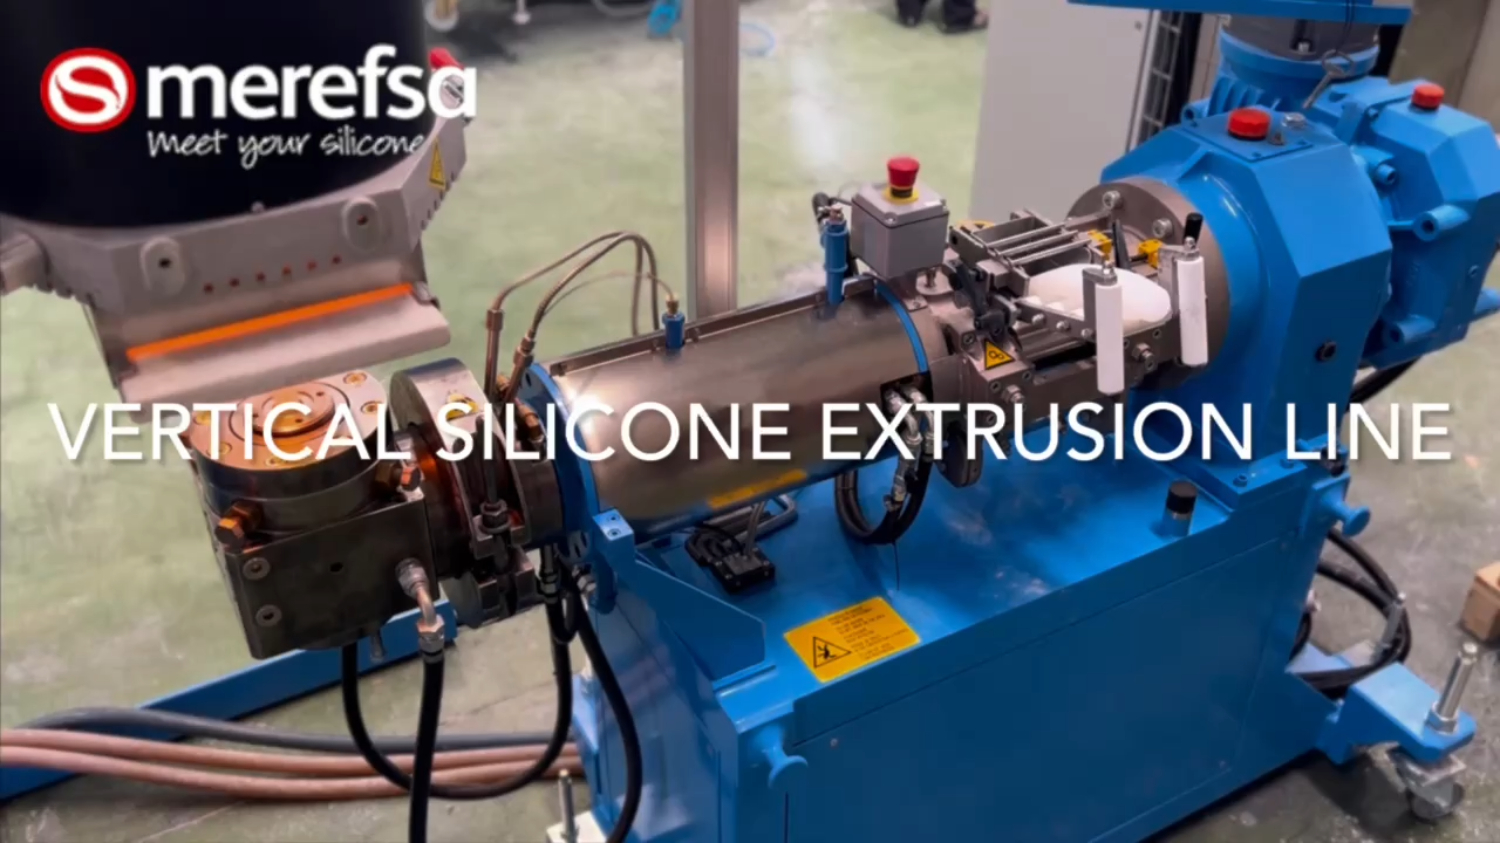 Vertical silicone extrusion line